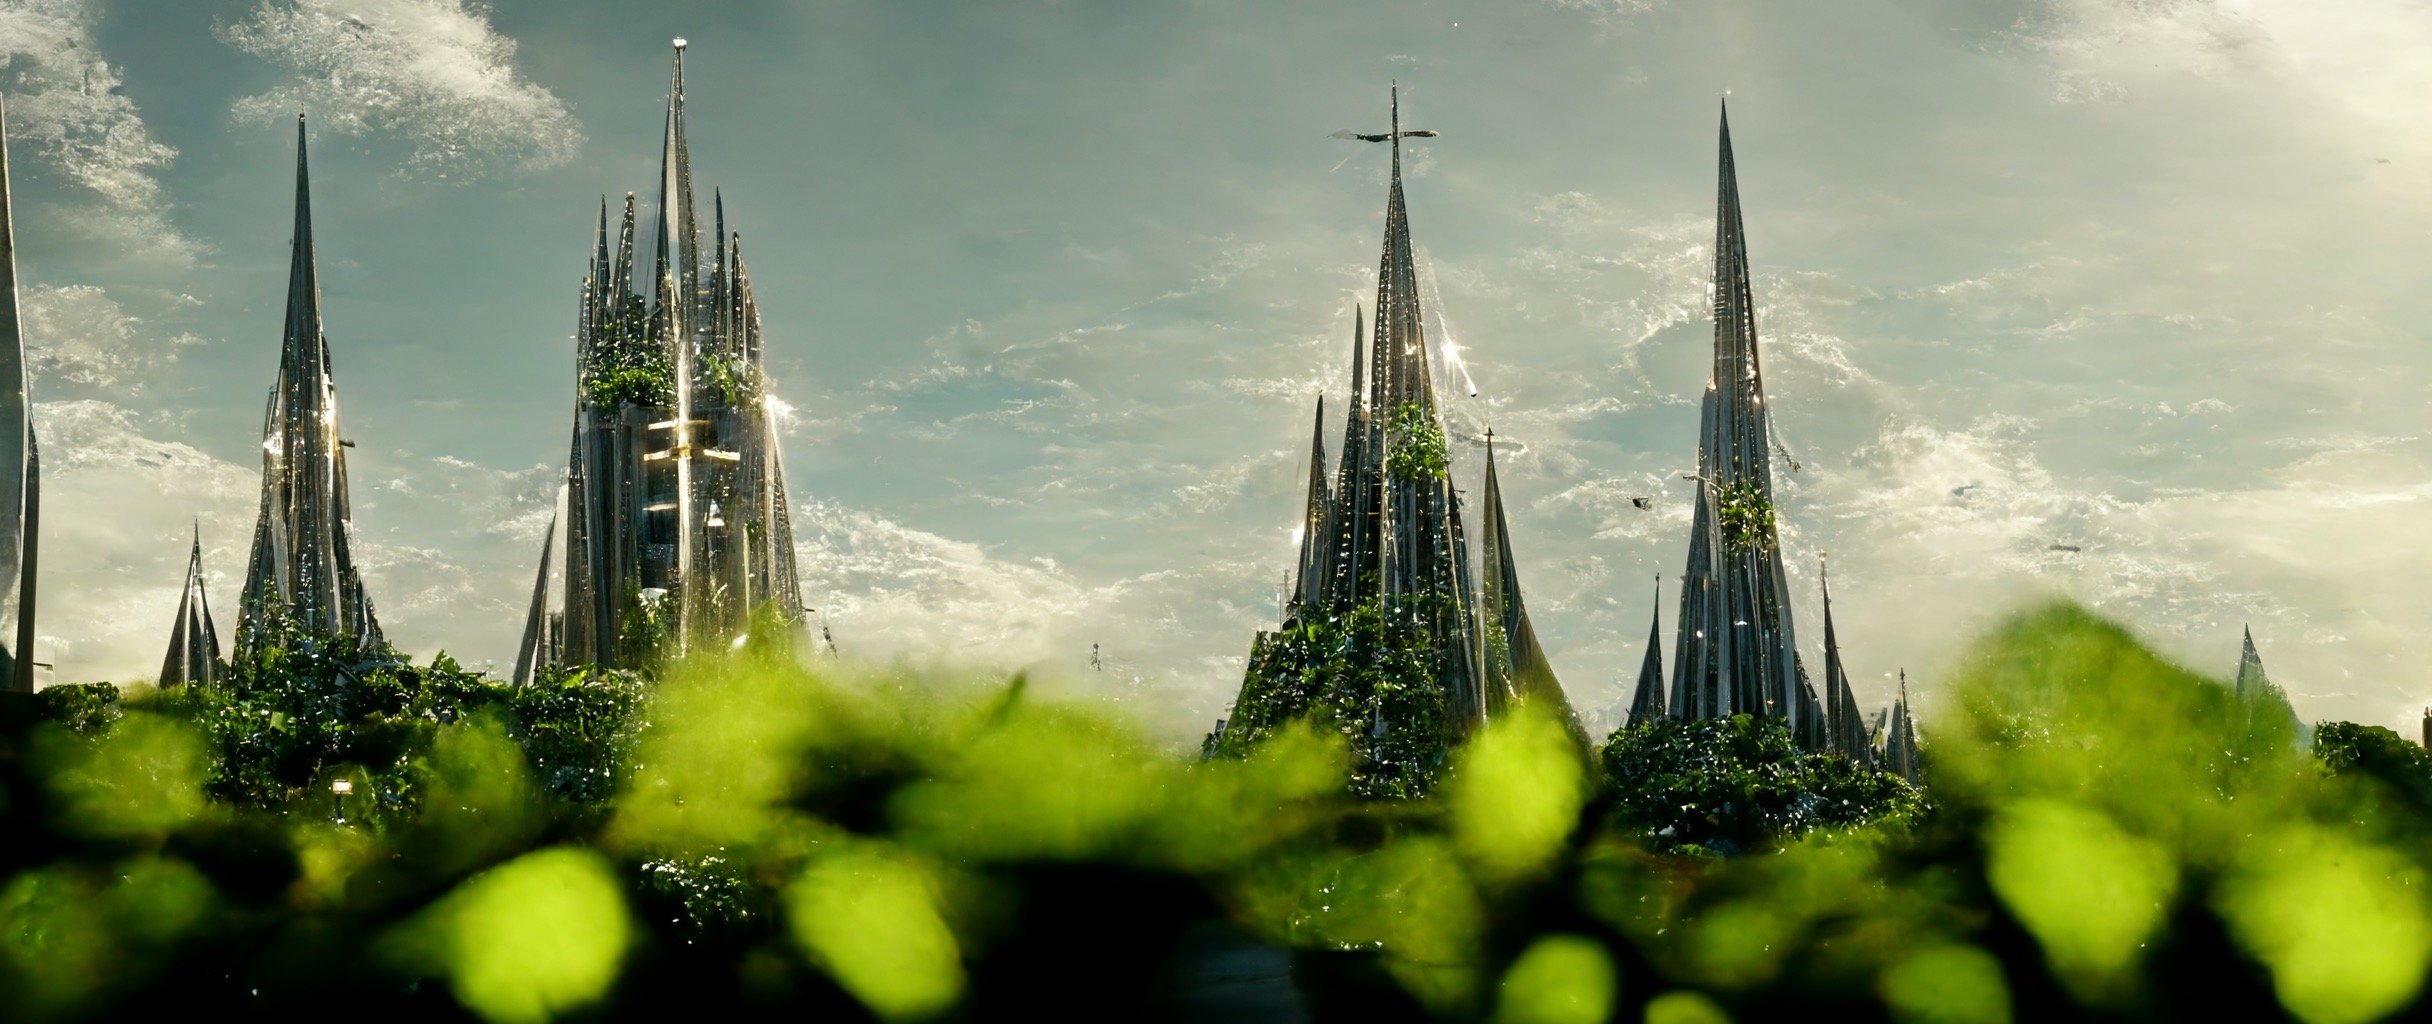 6b91a7ee-26ff-4fe5-a1e5-1d5d5d85c8d8_S3RAPH_httpss.mj.rundz0cKZ_epic_futuristic_cathedral._Filled_with_lush_plant_life._cinematic_composition_8k.JPG